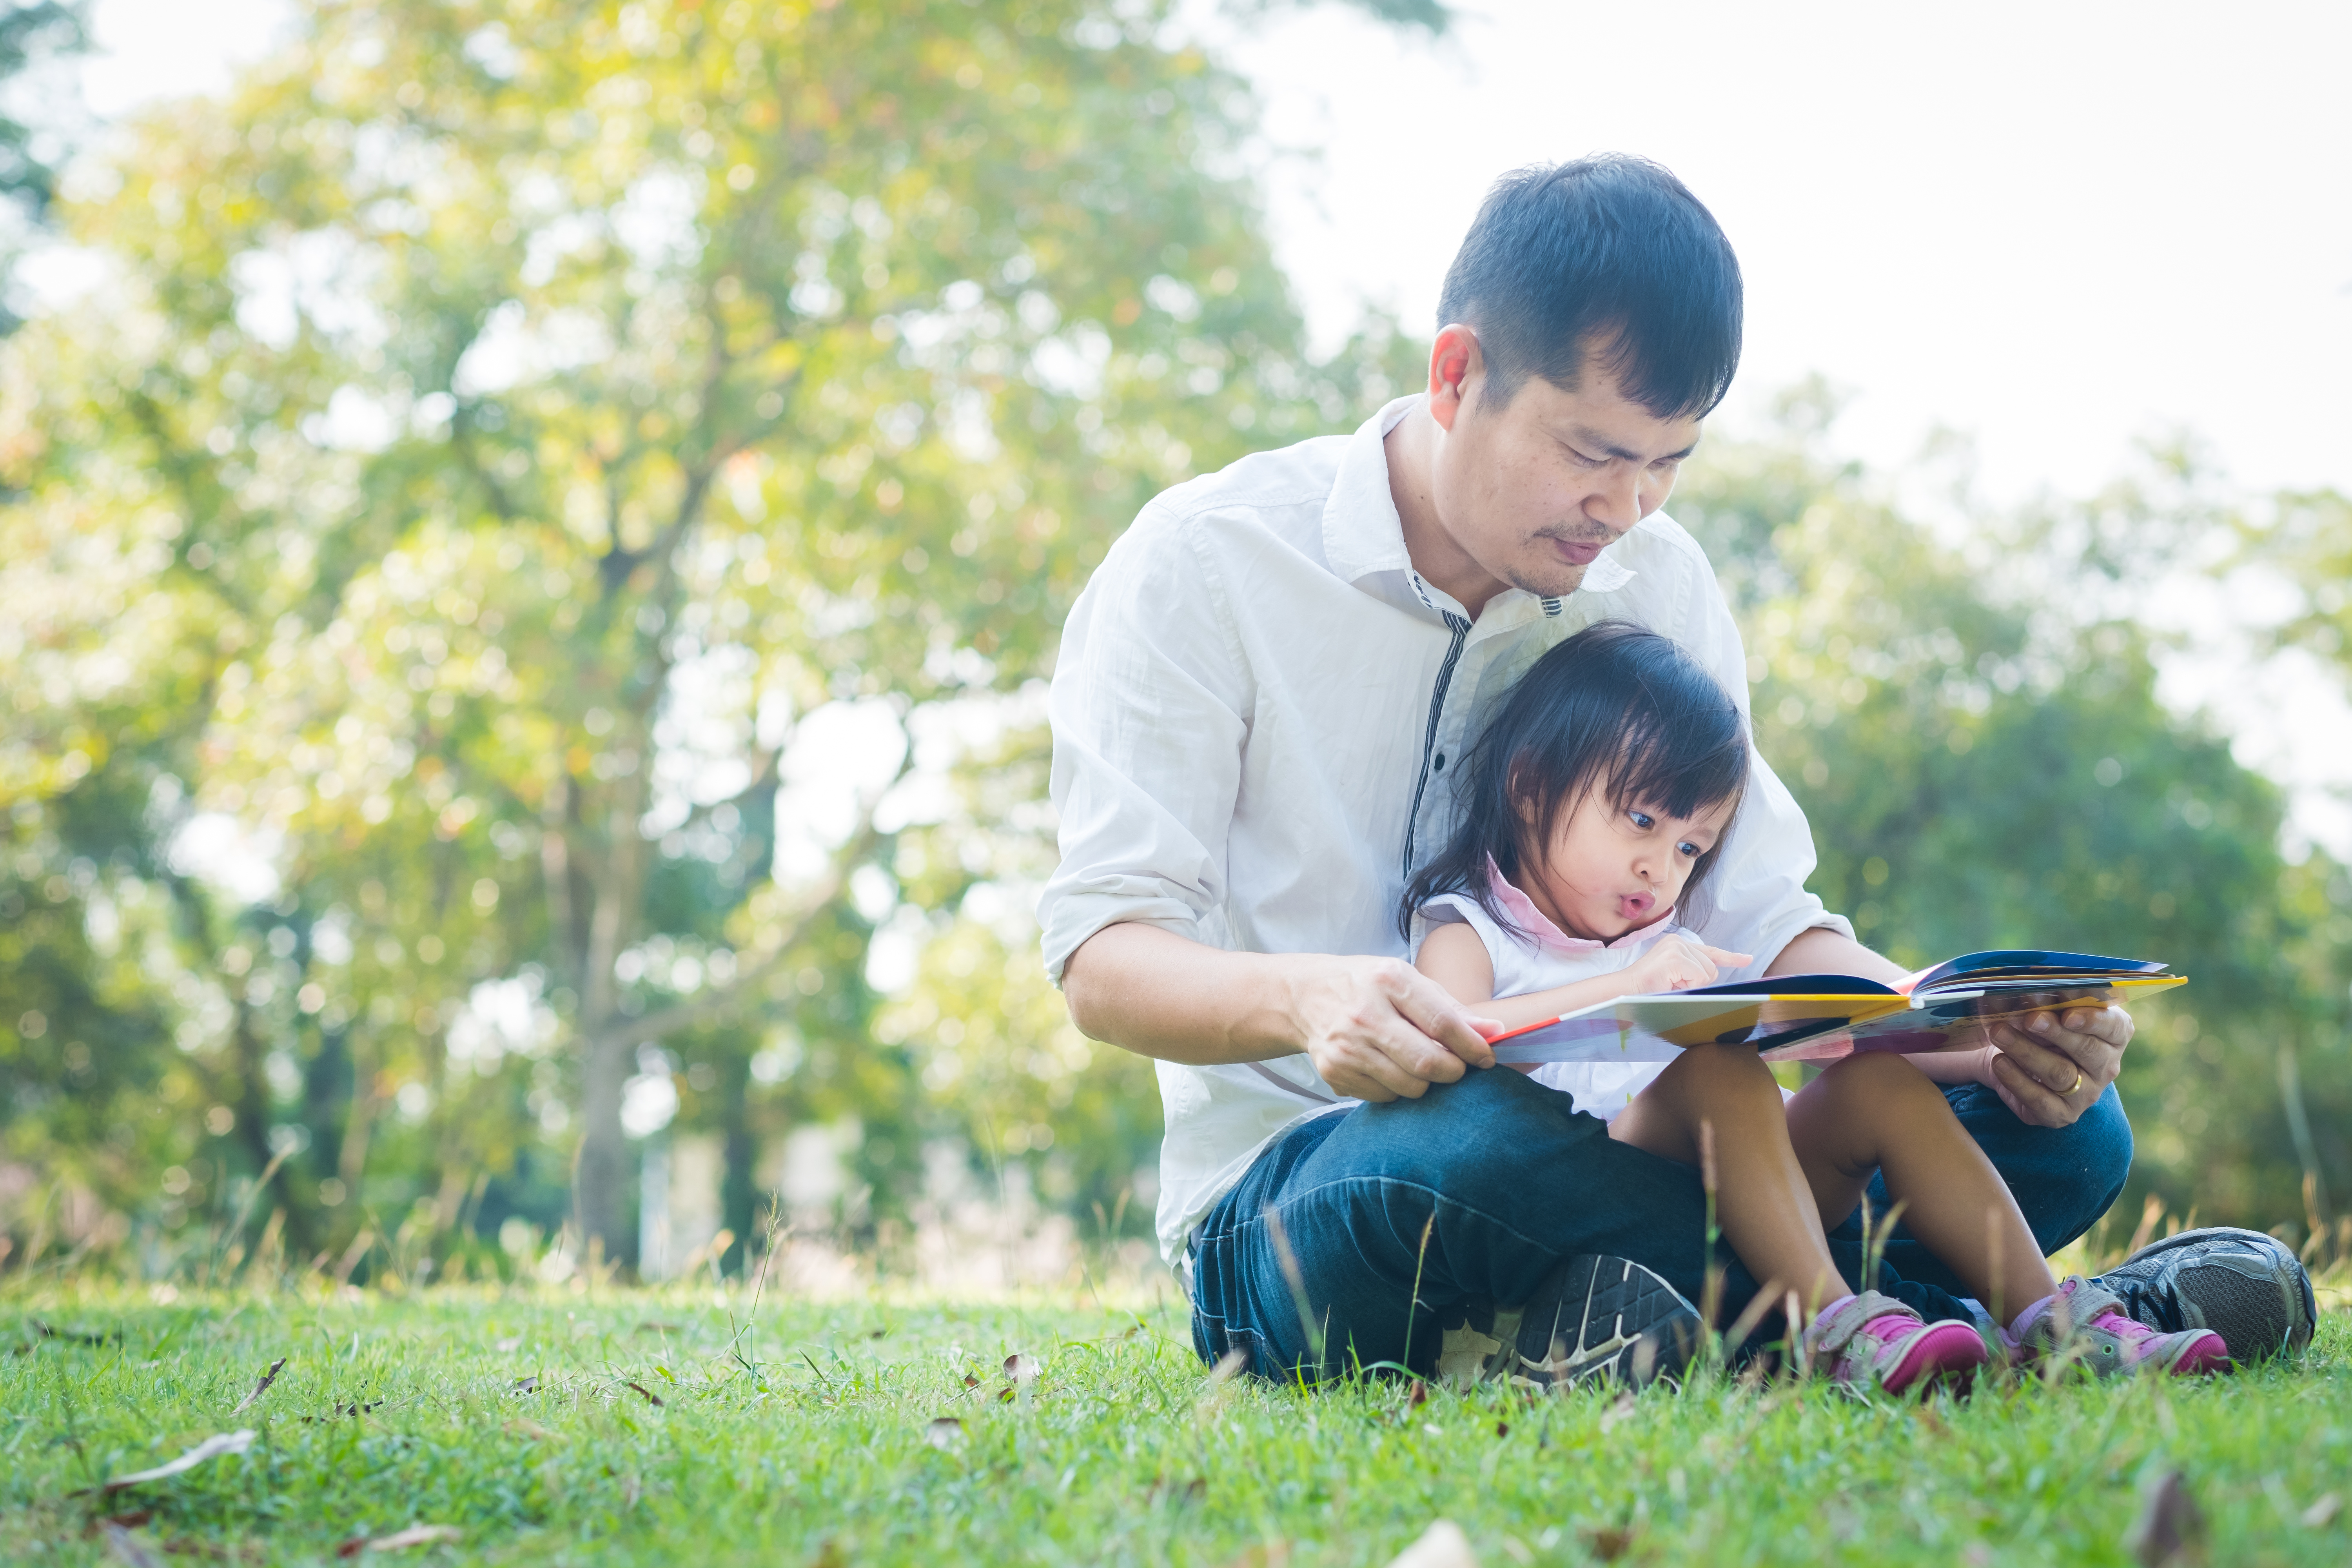 A man and child sit together outside looking at a book